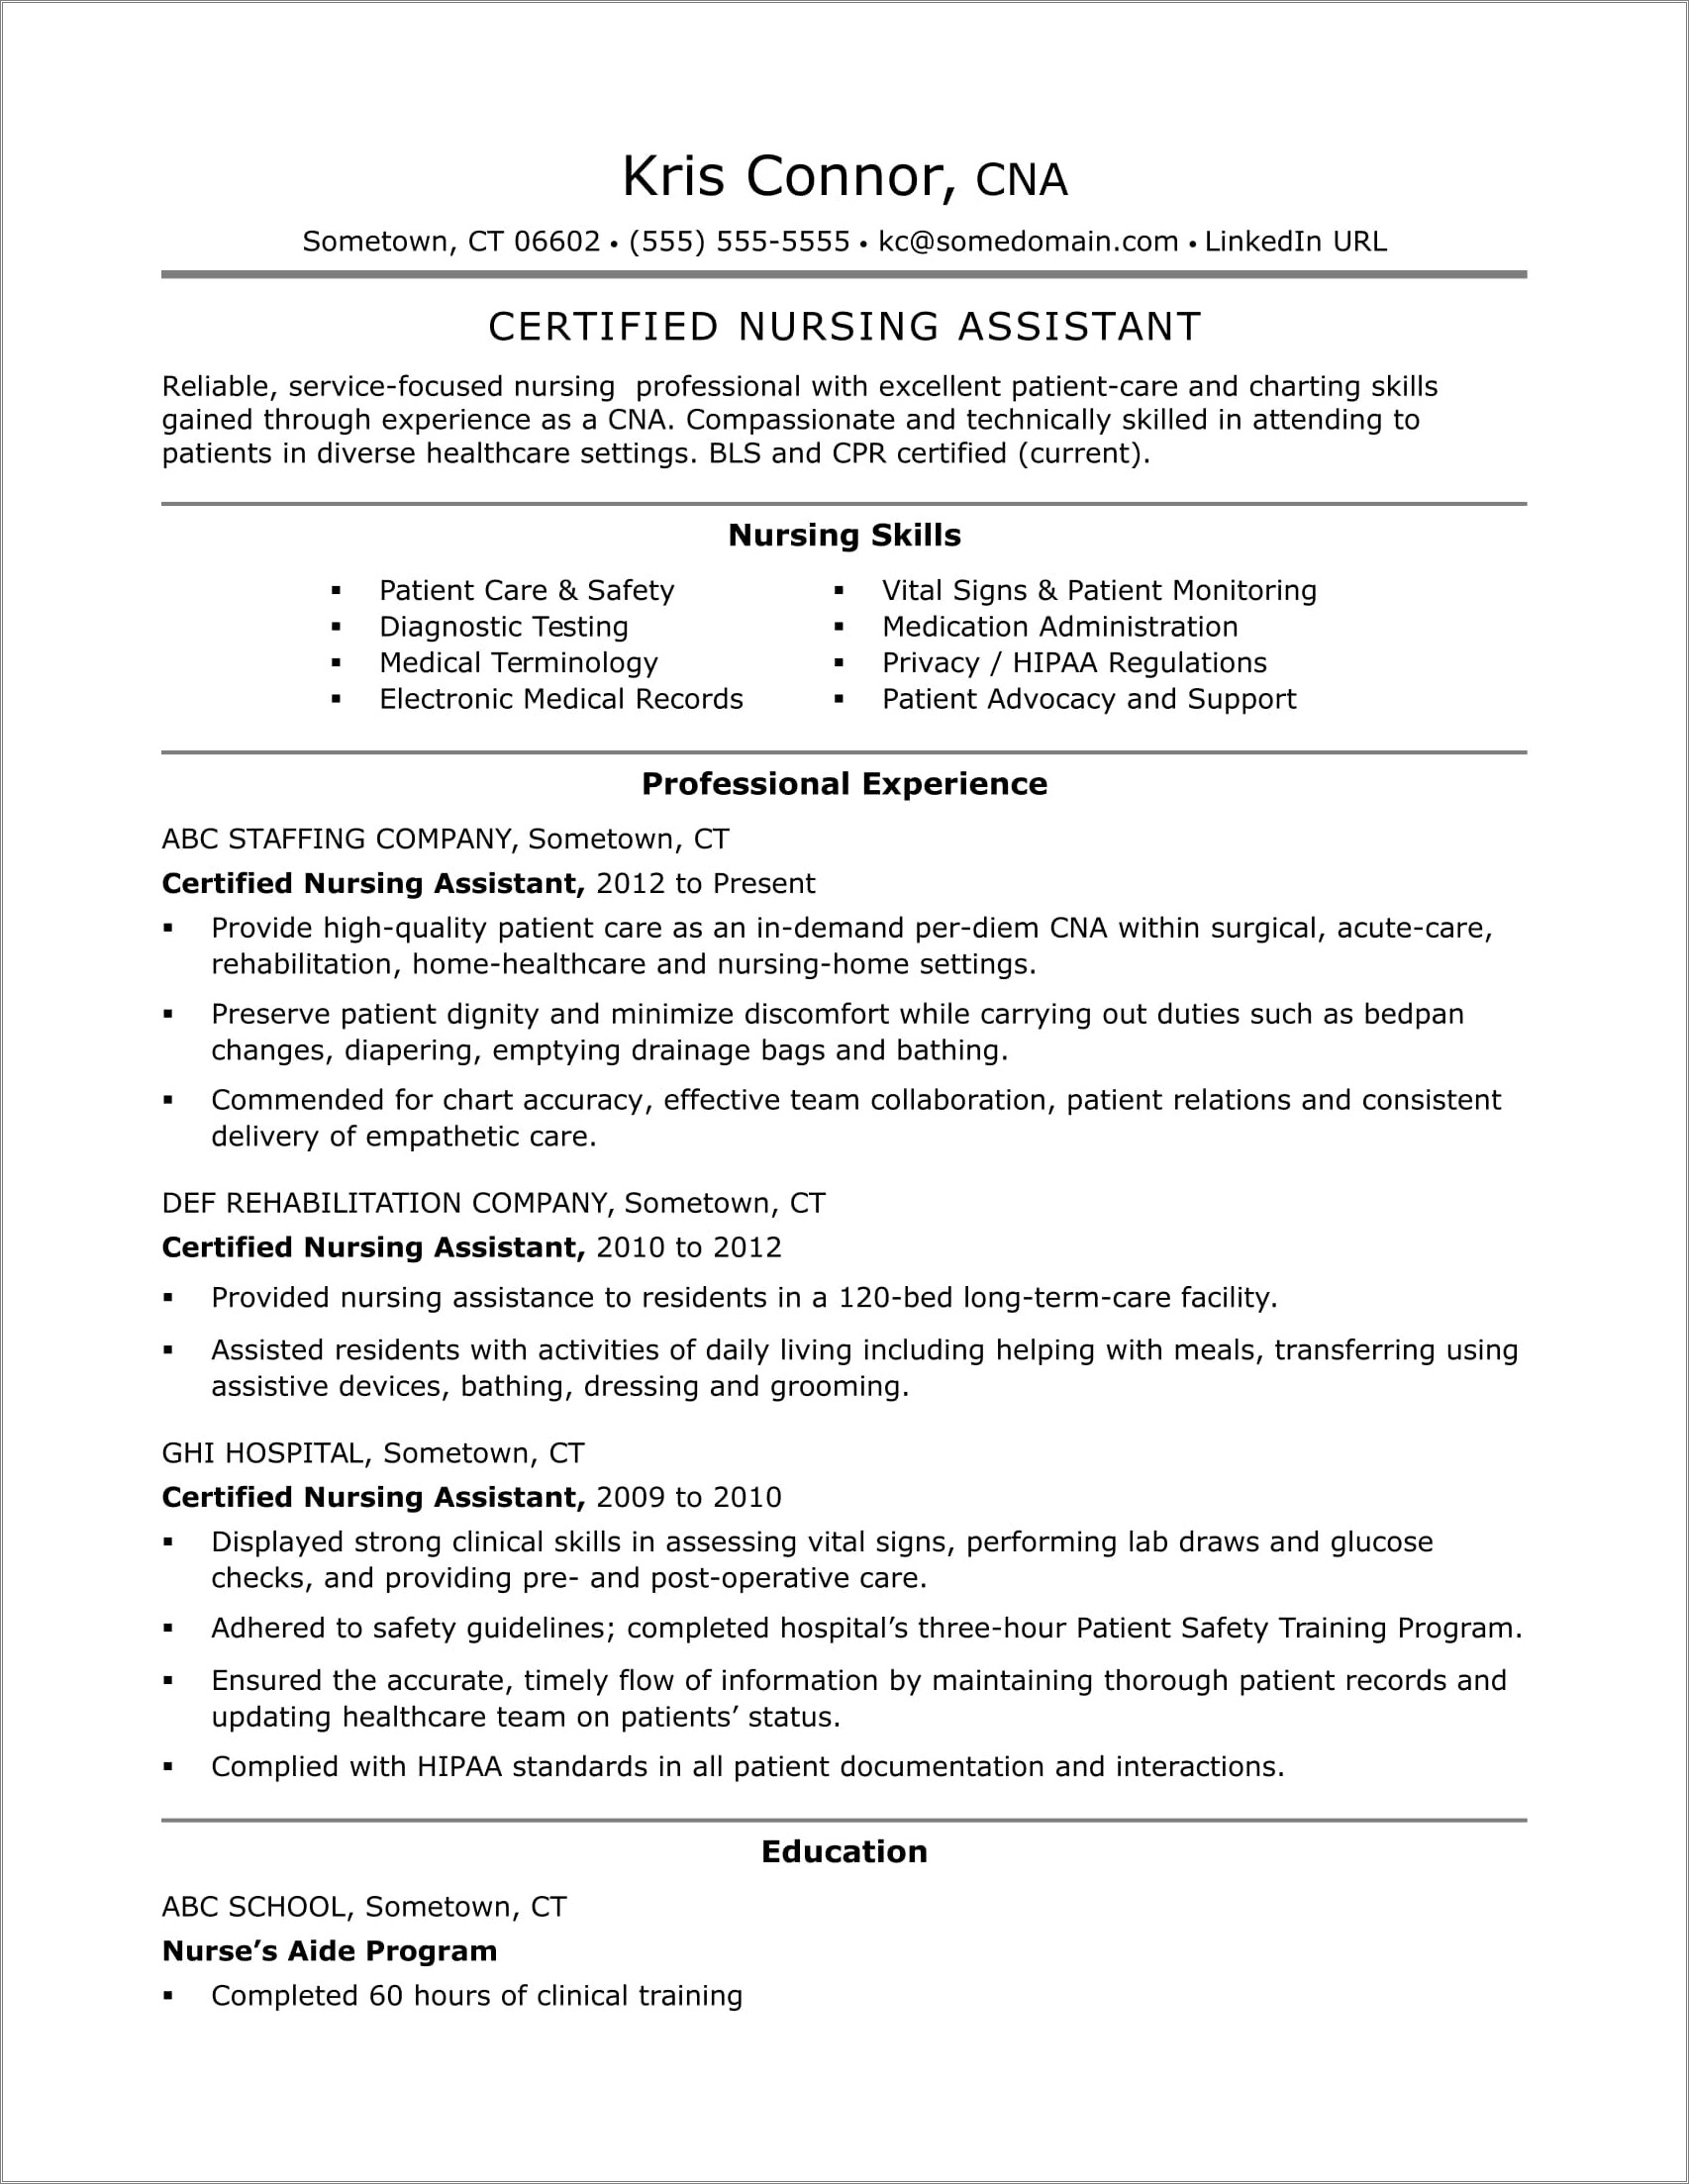 Examples Of Skills And Qualifications In A Resume